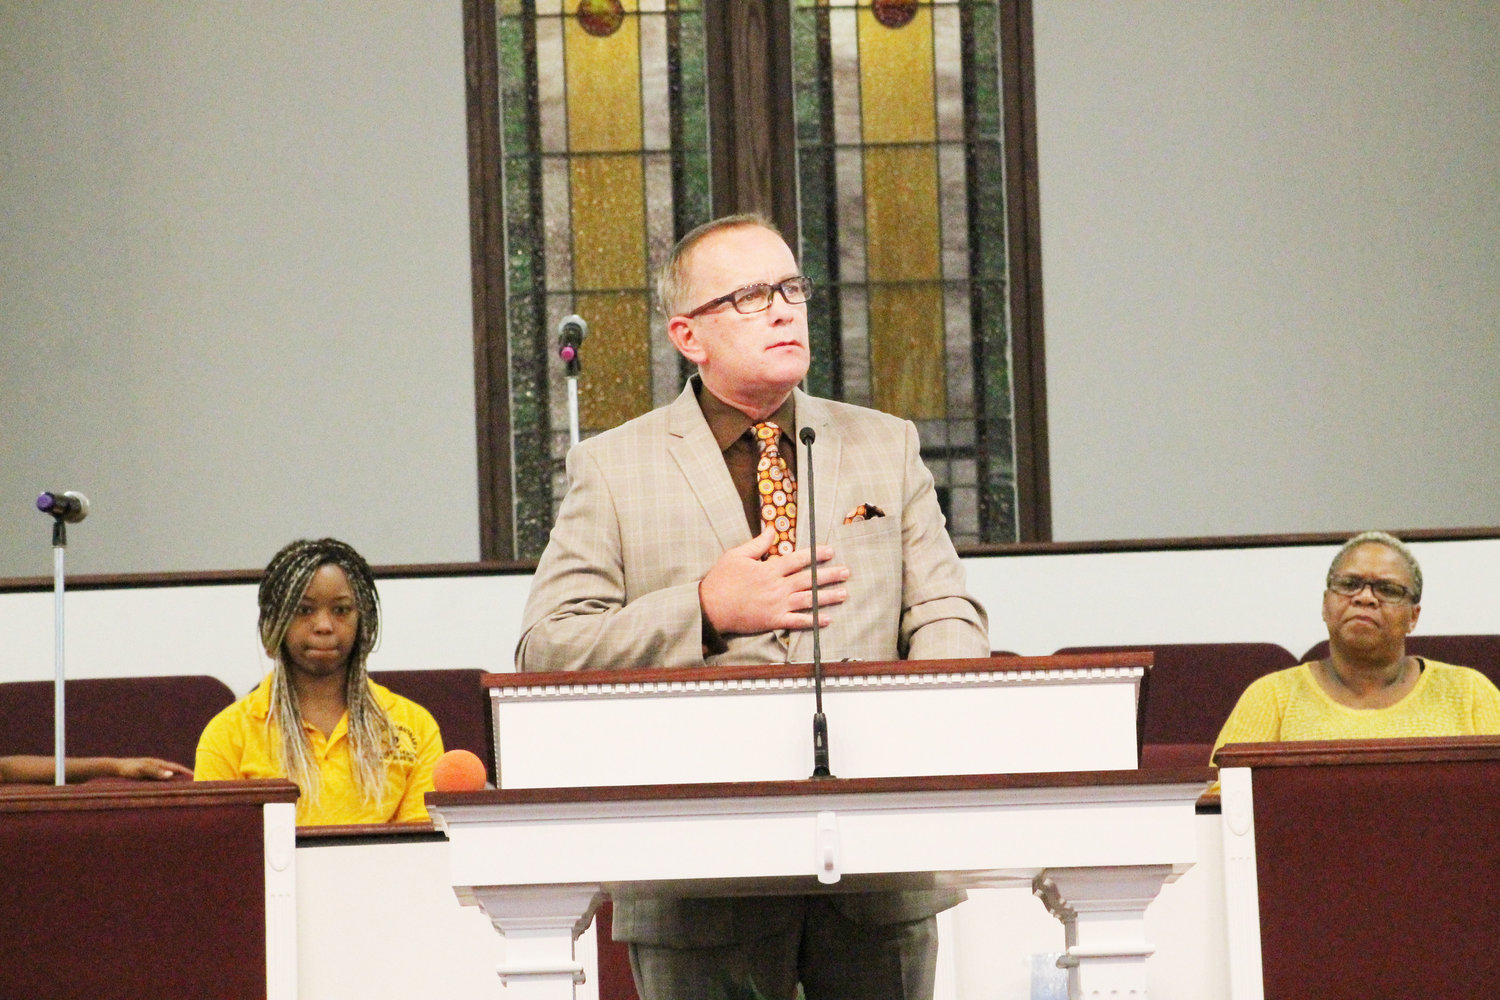 Mineola Ministerial Alliance President David Bethel gave a spiritual perspective on the answer to unrest in today’s world